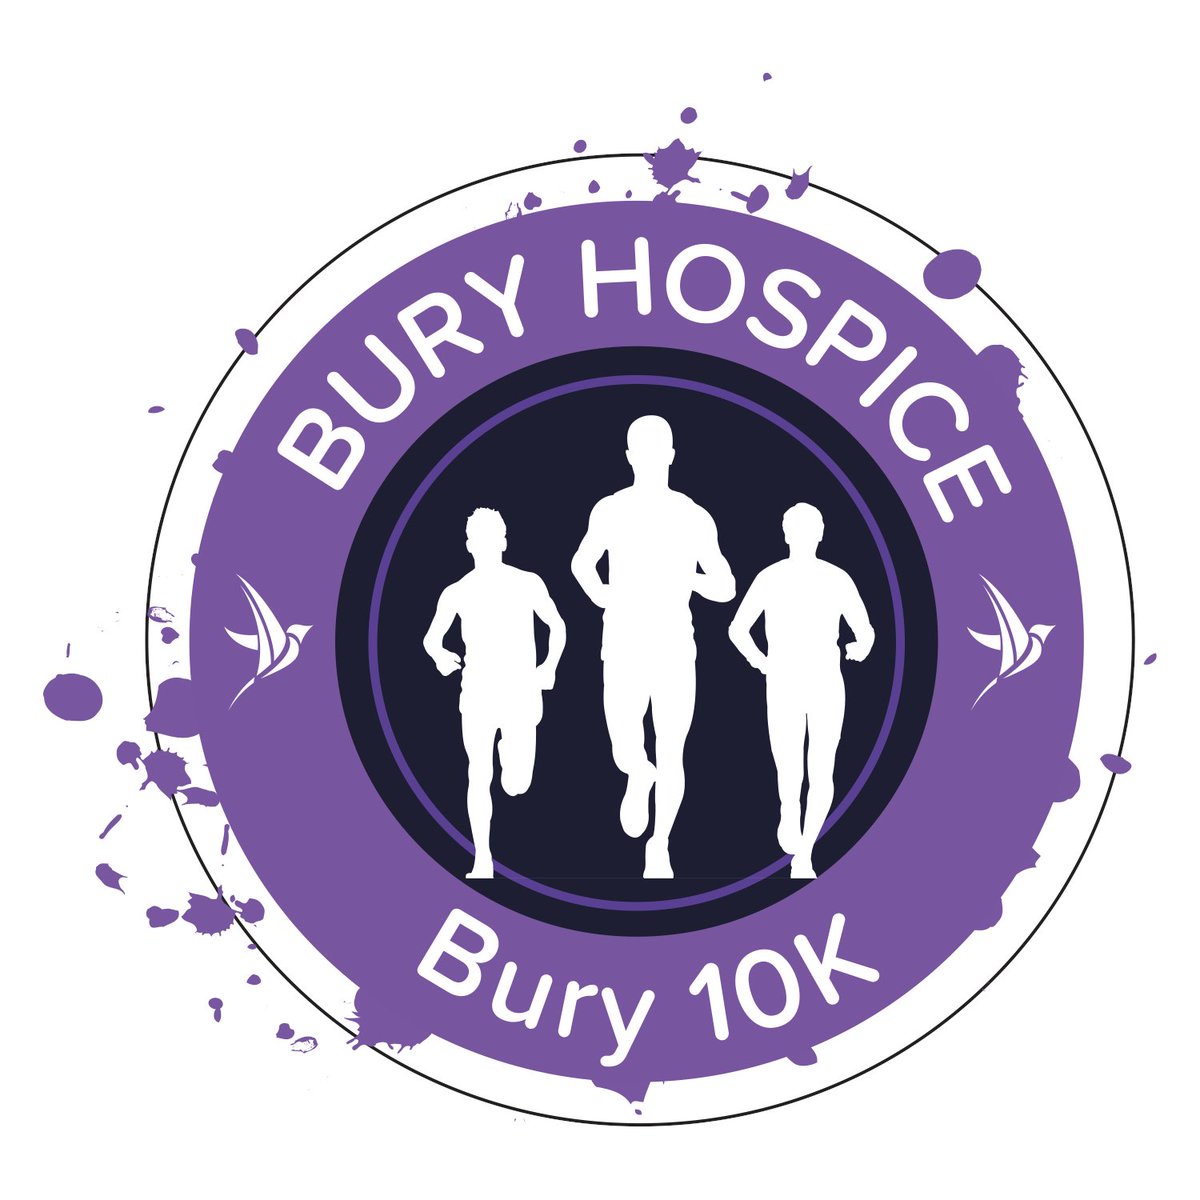 If you’re looking to get motivated, pull on those trainers and take on the Bury 10K for Bury Hospice. The run will be taking place on Sunday 15th September, starting and finishing close to The Rock. Head here for more information: buryhospice.org.uk/bury-10k